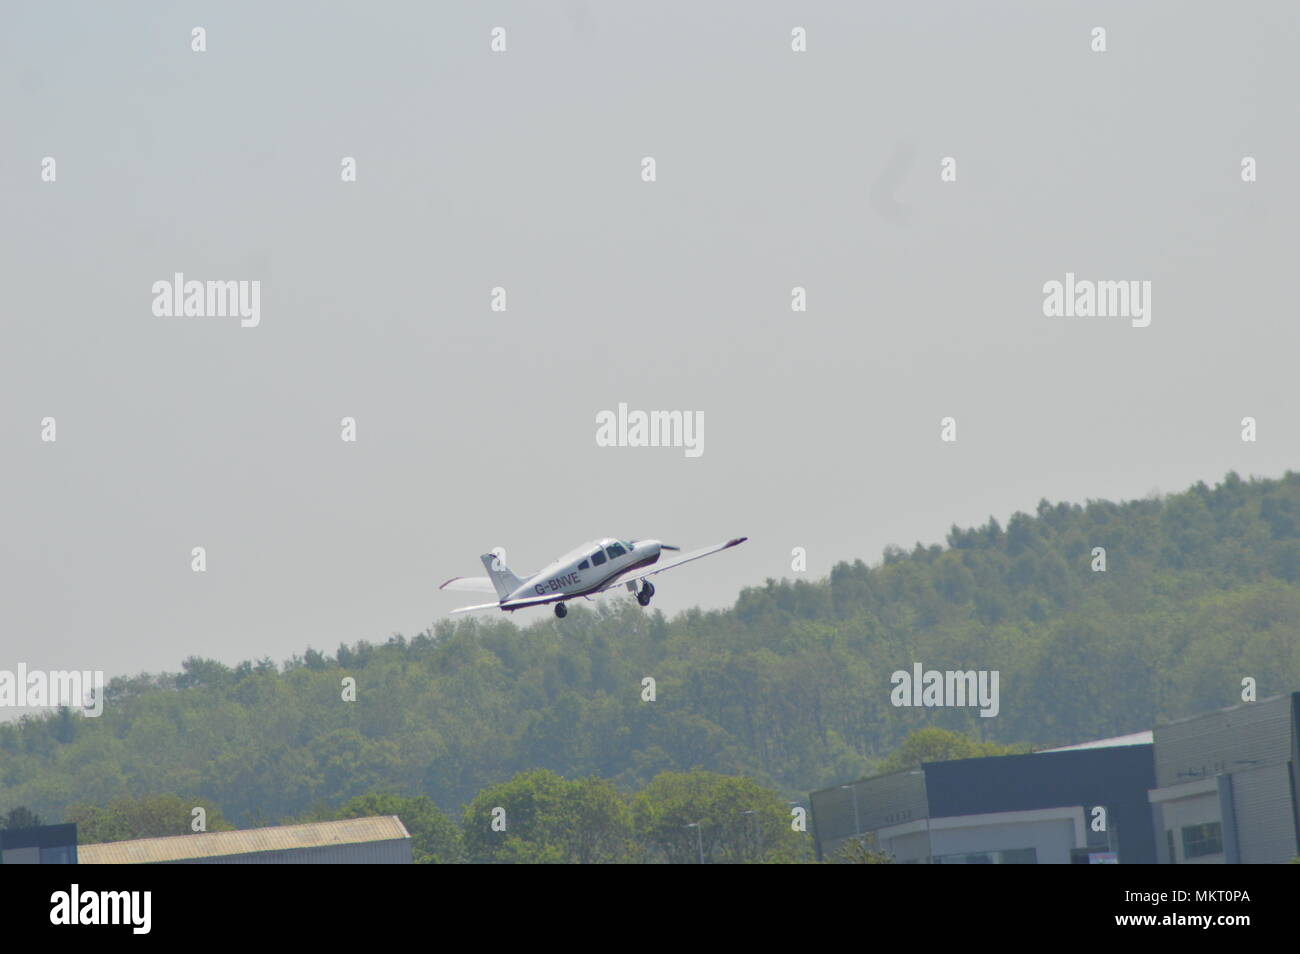 small planes in airport Stock Photo